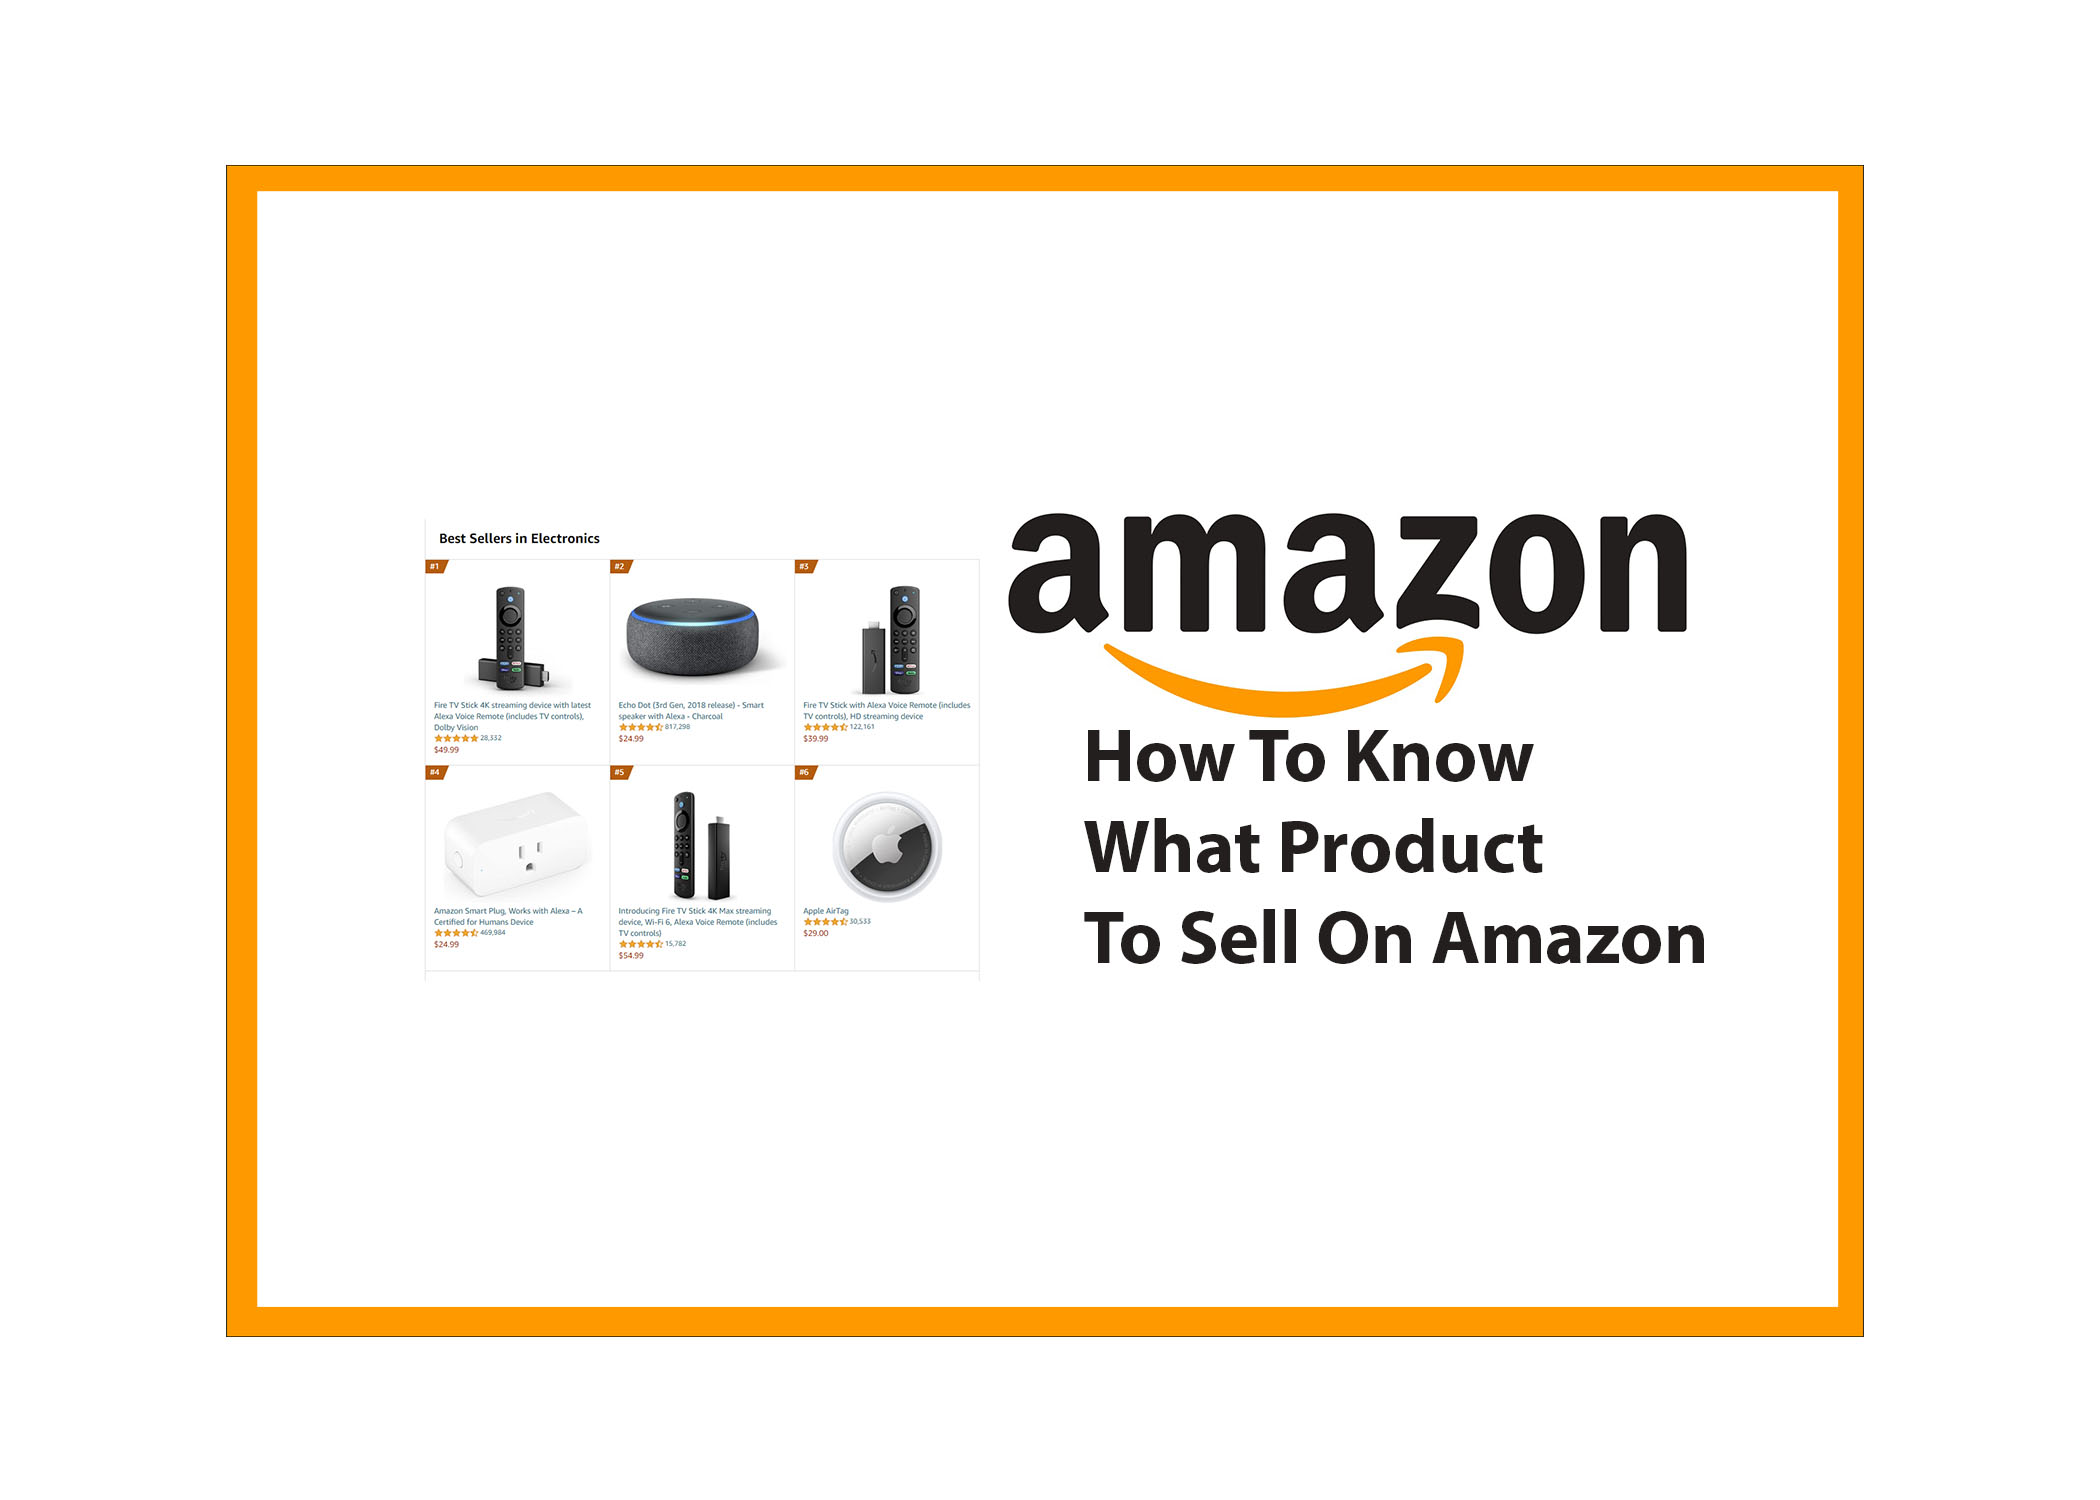 How To Know What Product To Sell On Amazon